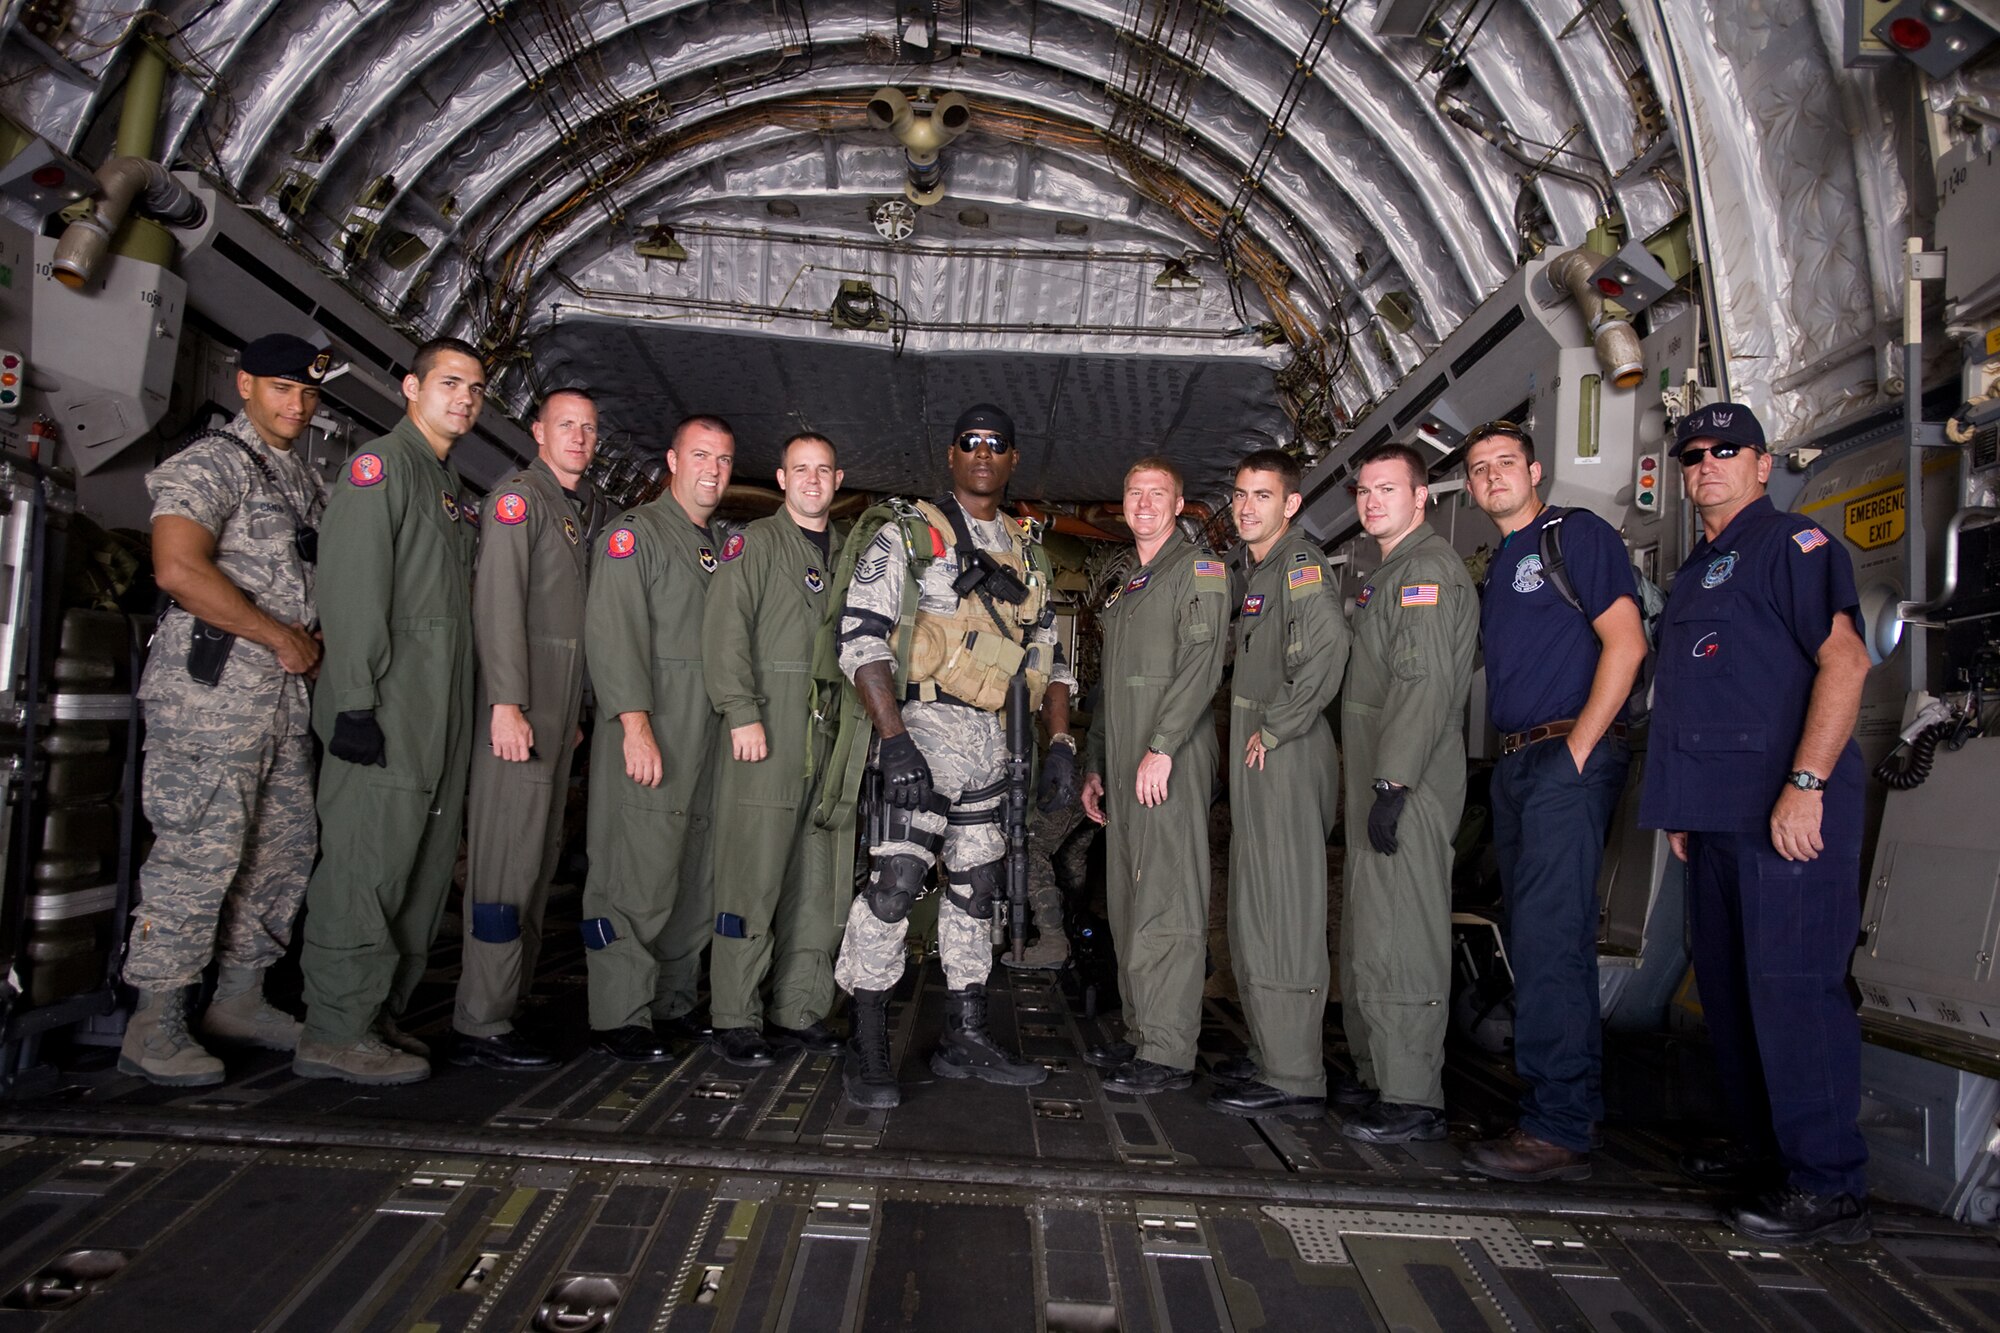 ALTUS AIR FORCE BASE, Okla. -- Members of the 97th Air Mobility Wing pose with actor Tyrese Gibson in the back of a C-17 Globemaster III during filming of "Transformers: Revenge of the Fallen." The aircrew members served as both movie extras and consultants on information pertaining to Air Force aircrew procedures. (Courtesy photo, copyright 2009 Paramount Pictures)